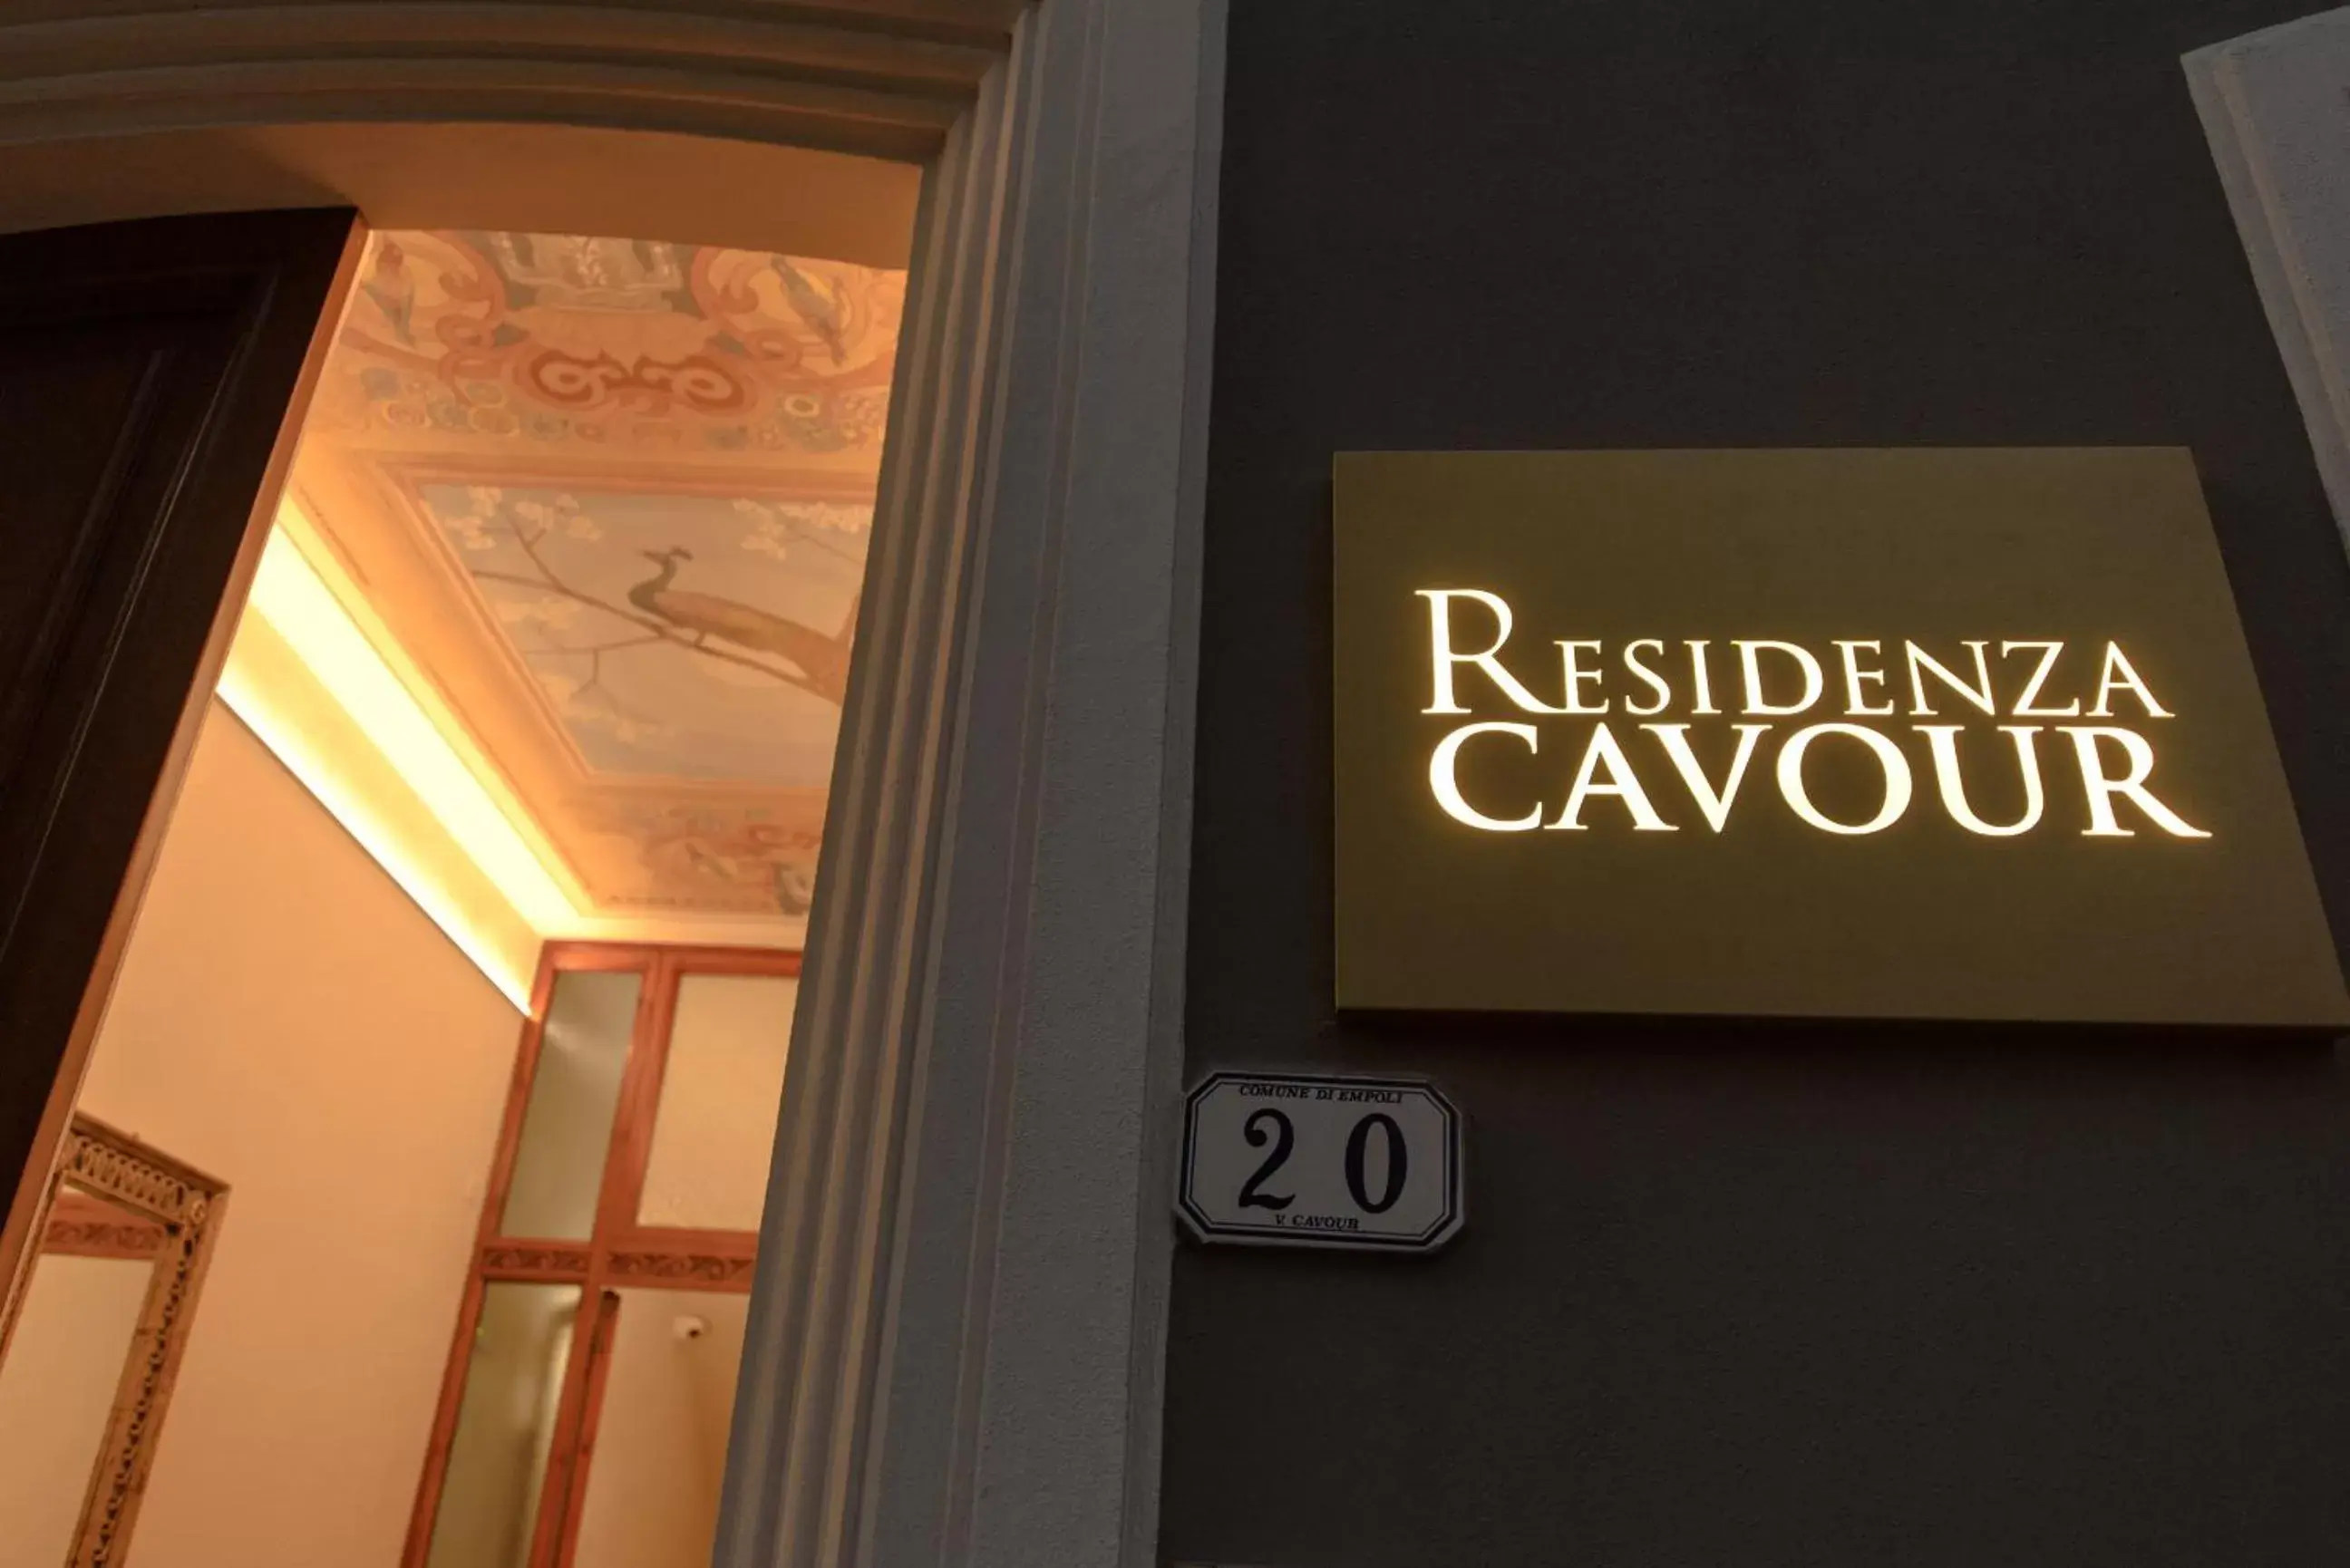 Area and facilities in Residenza Cavour